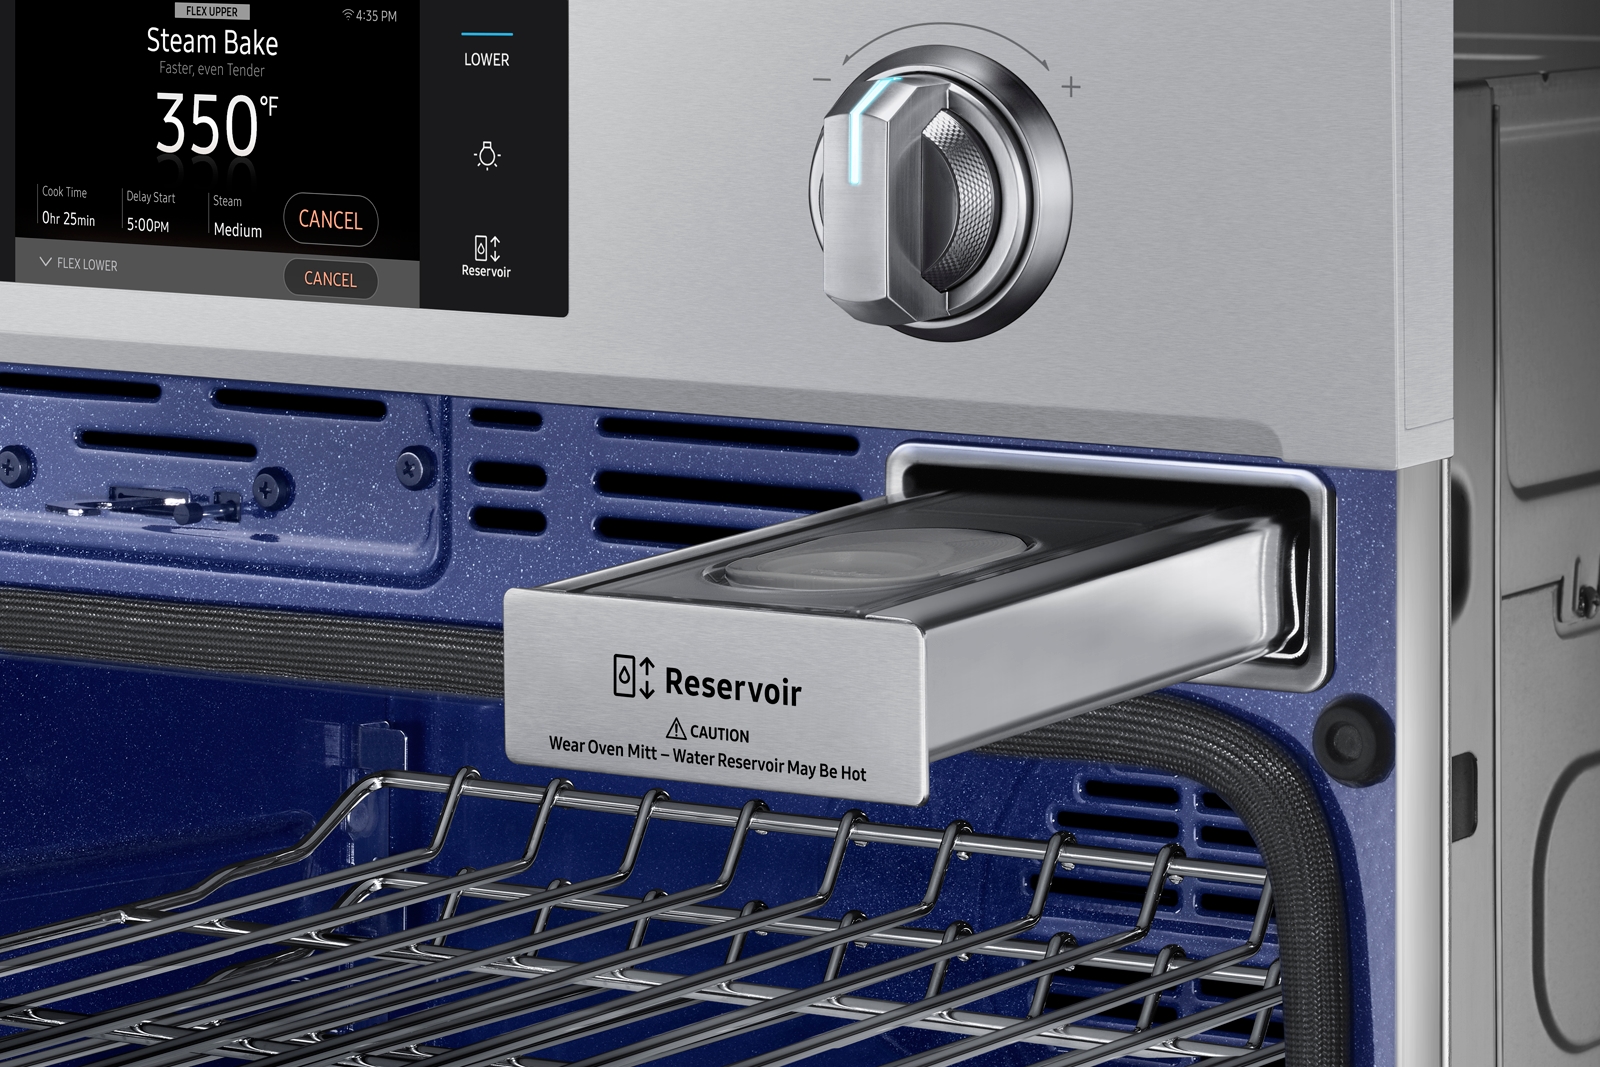 Thumbnail image of 30” Smart Single Wall Oven with Flex Duo™ in Stainless Steel